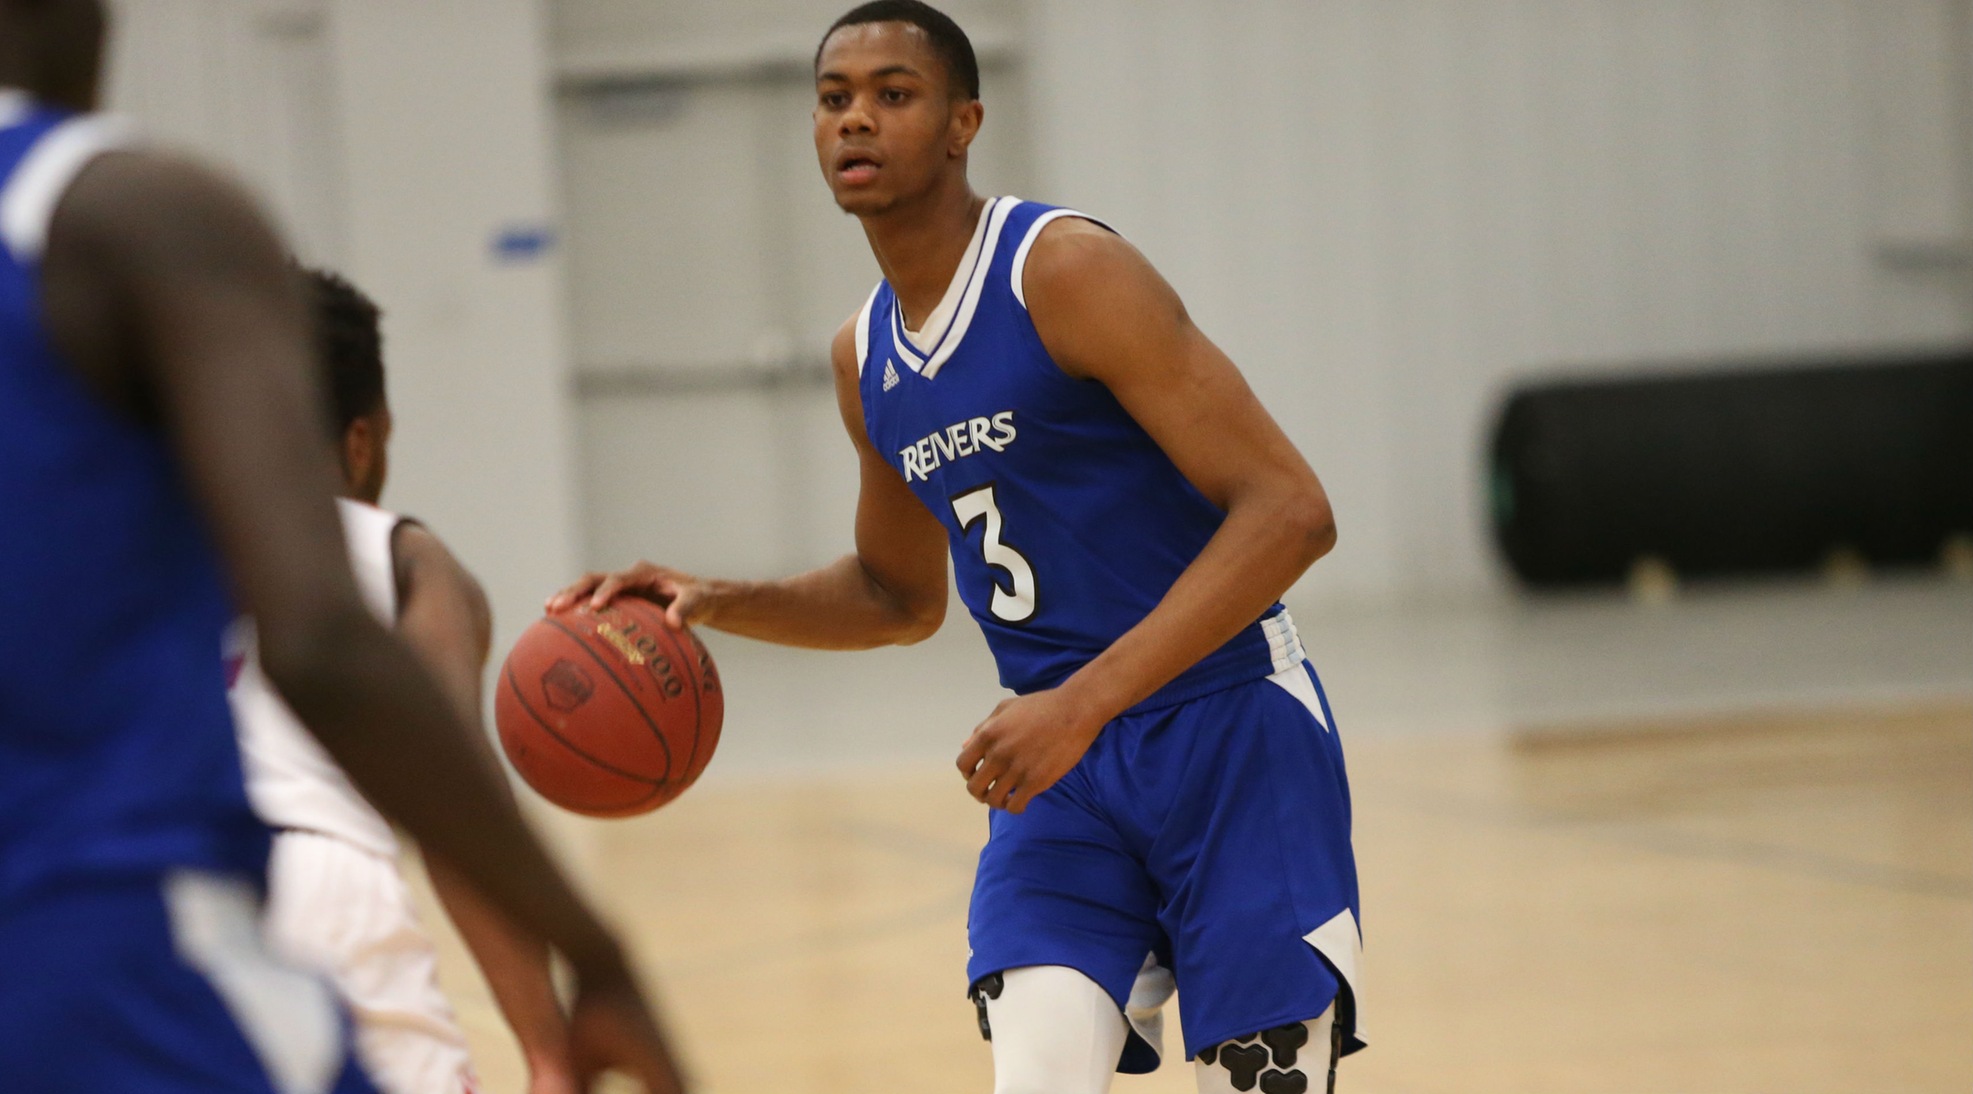 Marques Watson and his Iowa Western teammates shot just 11/26 from the foul line Saturday evening (2/9/19) in their 80-72 road loss at Northeast (NE).